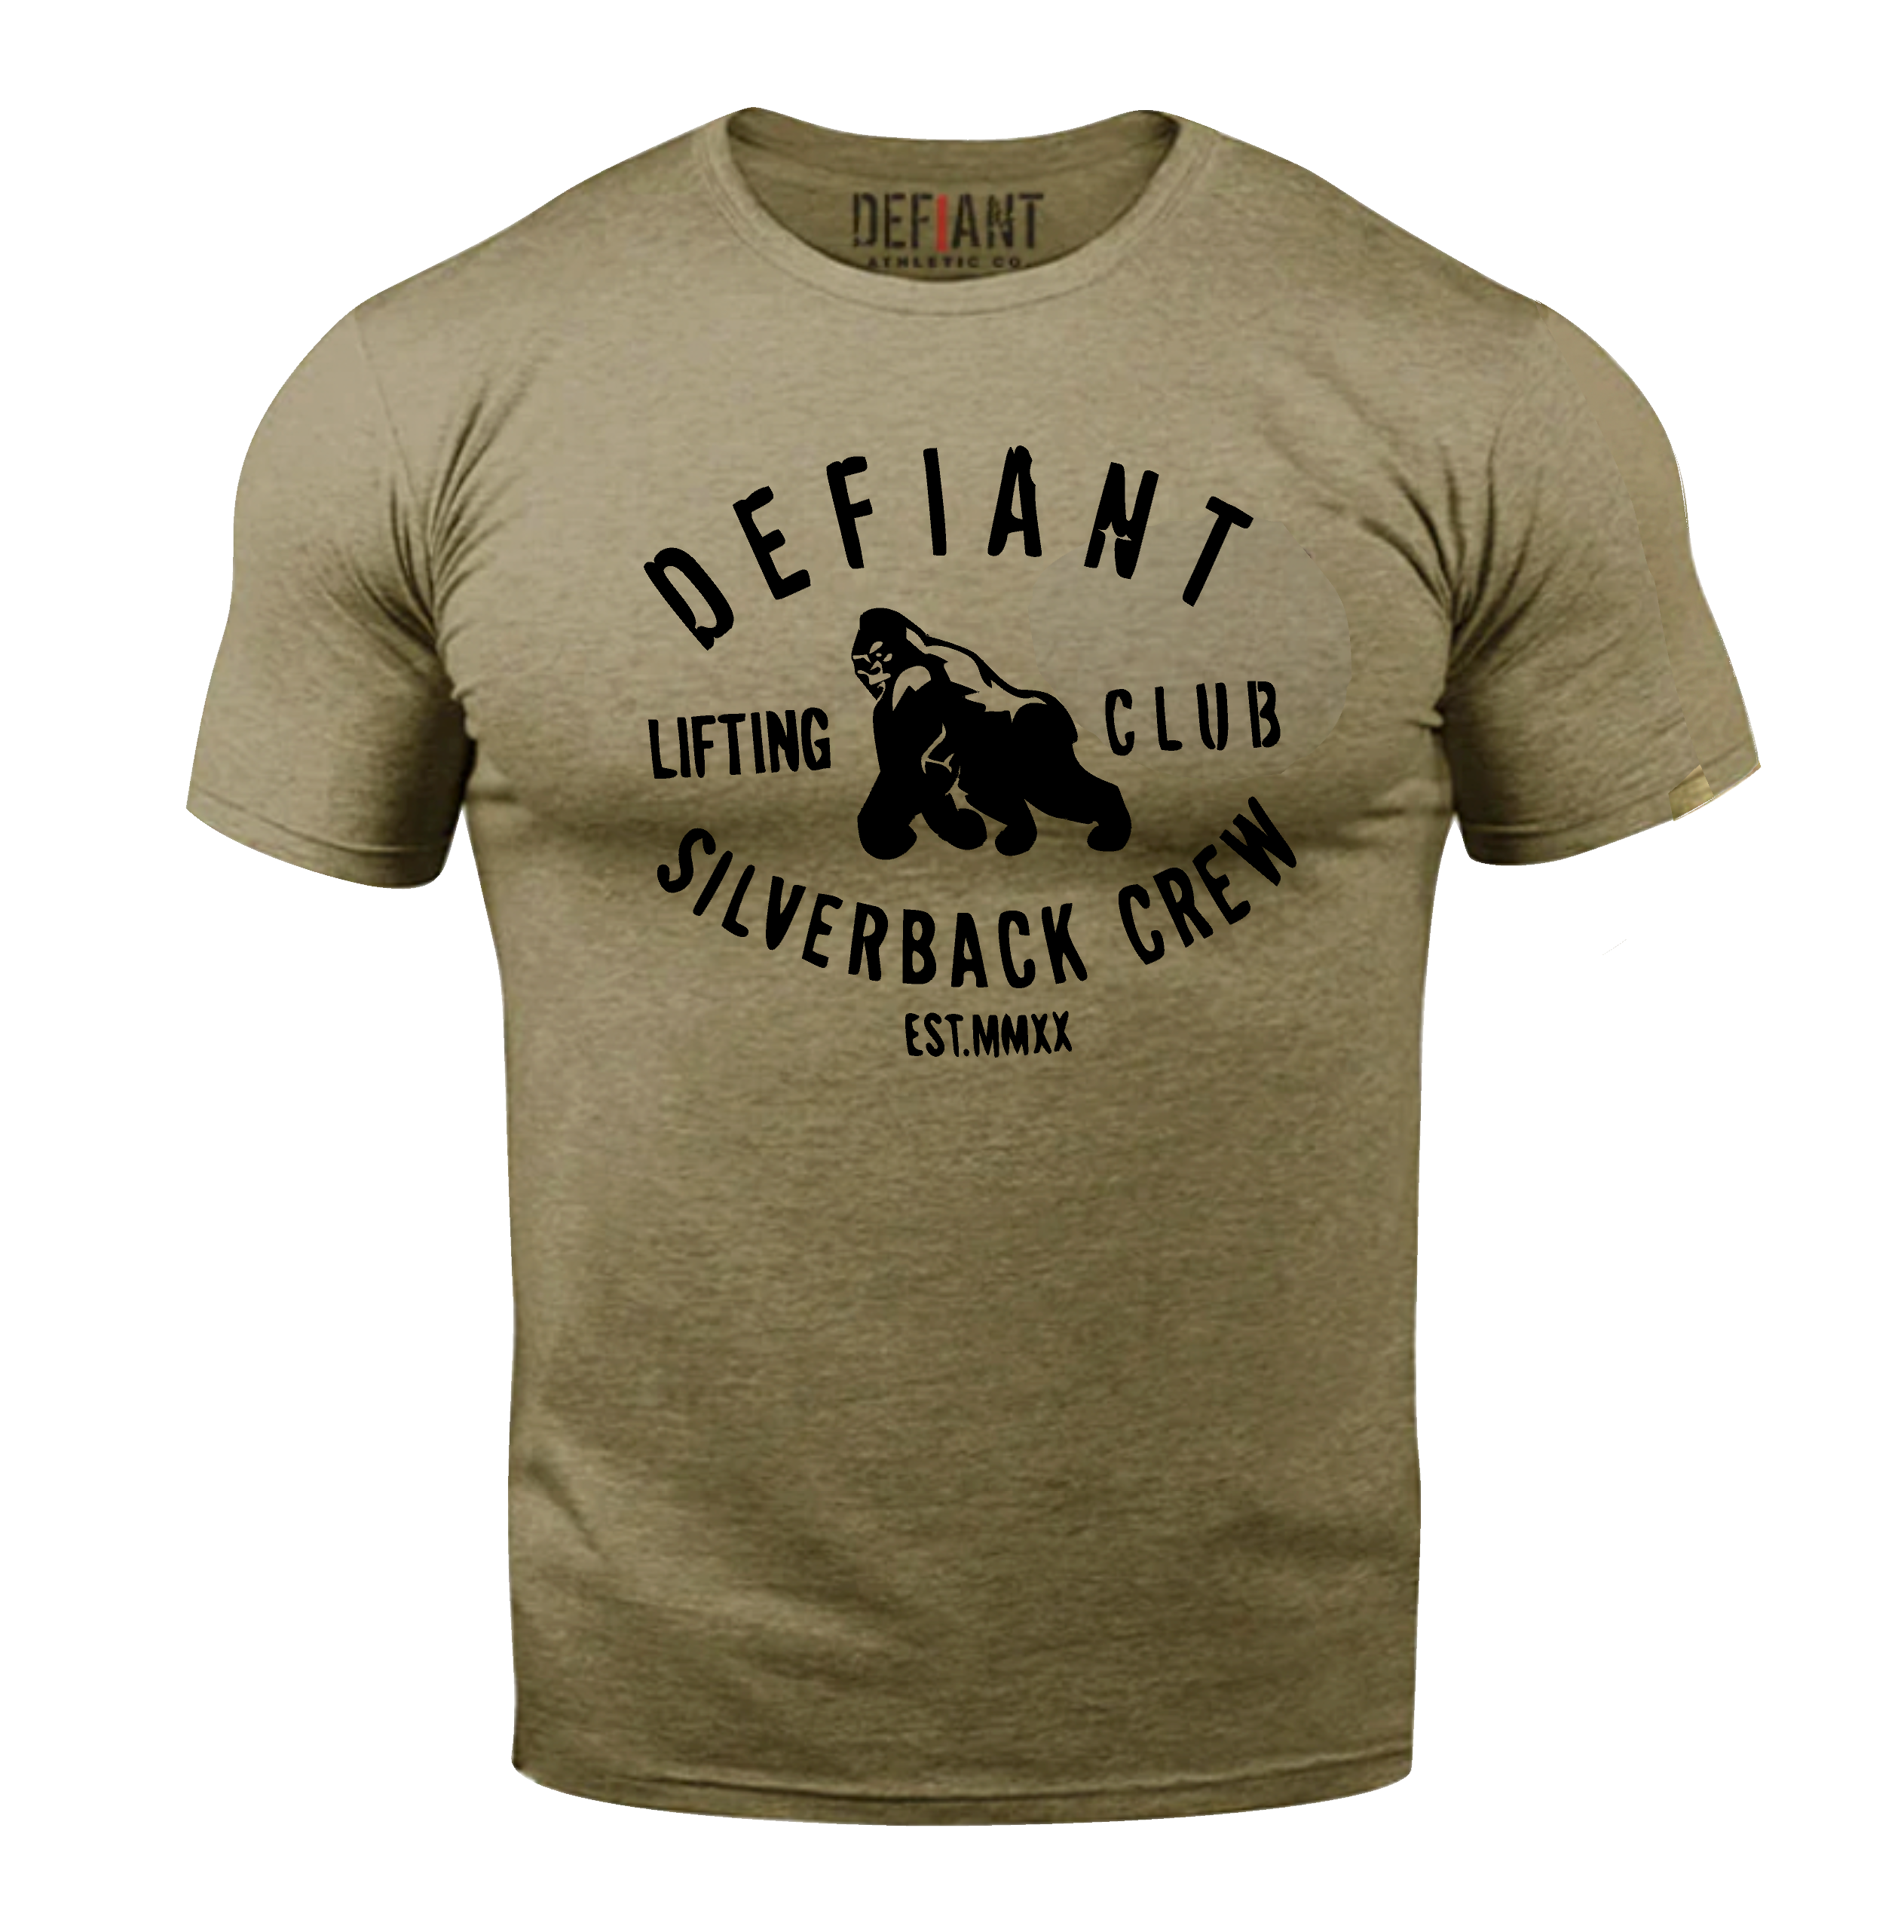 FEATURING SIZE 4XL - DEFIANT SILVERBACK  CREW